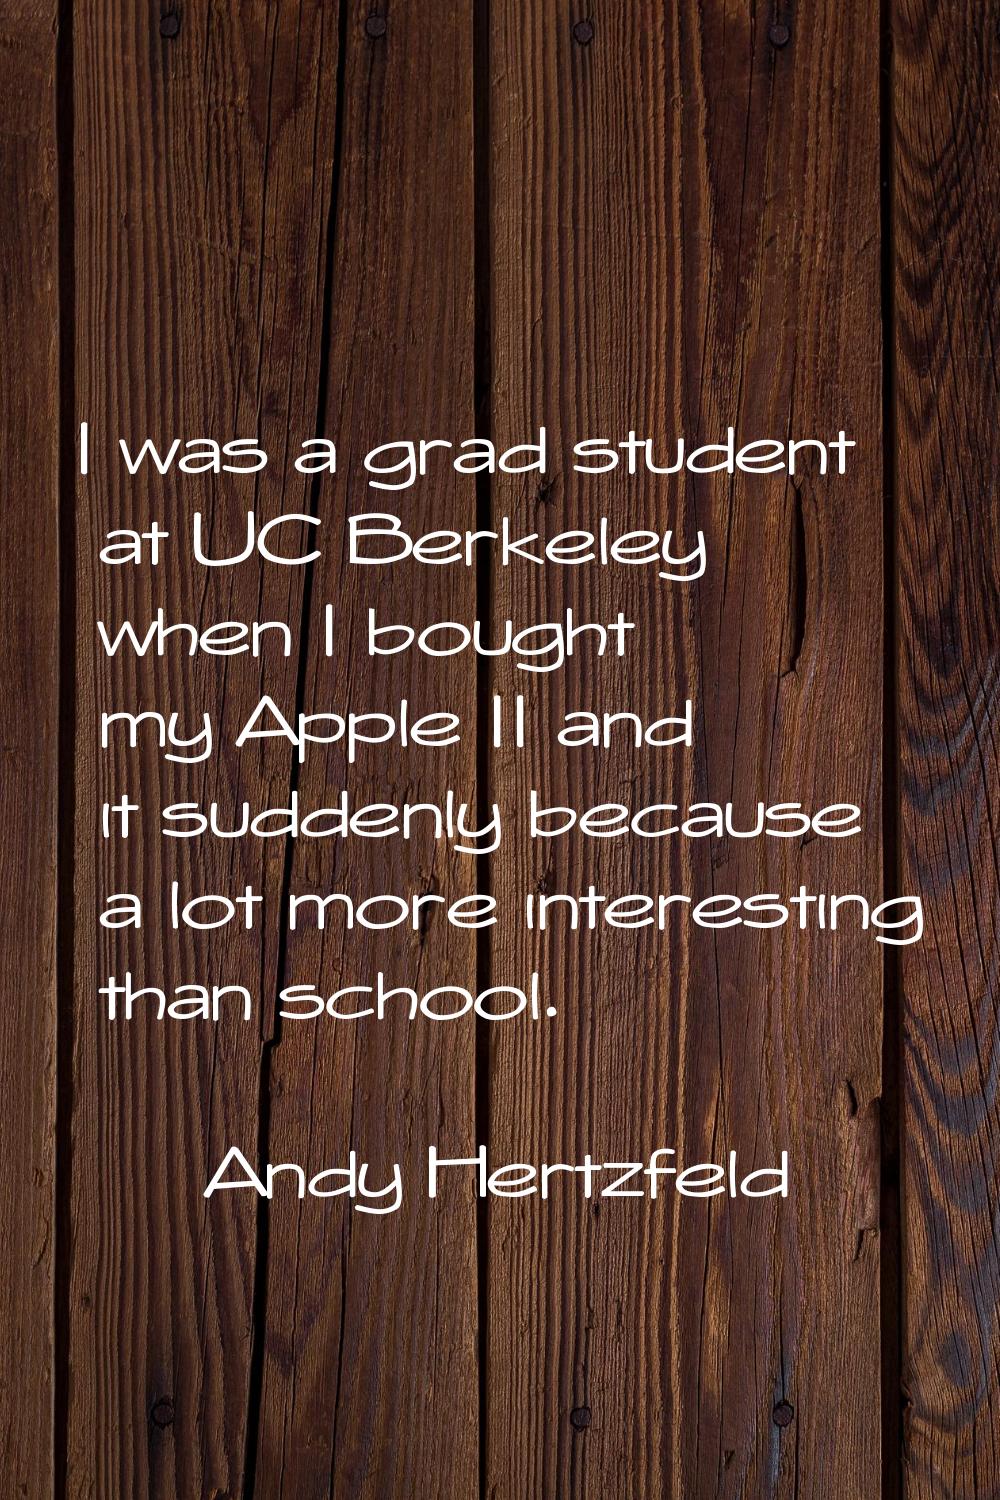 I was a grad student at UC Berkeley when I bought my Apple II and it suddenly because a lot more in